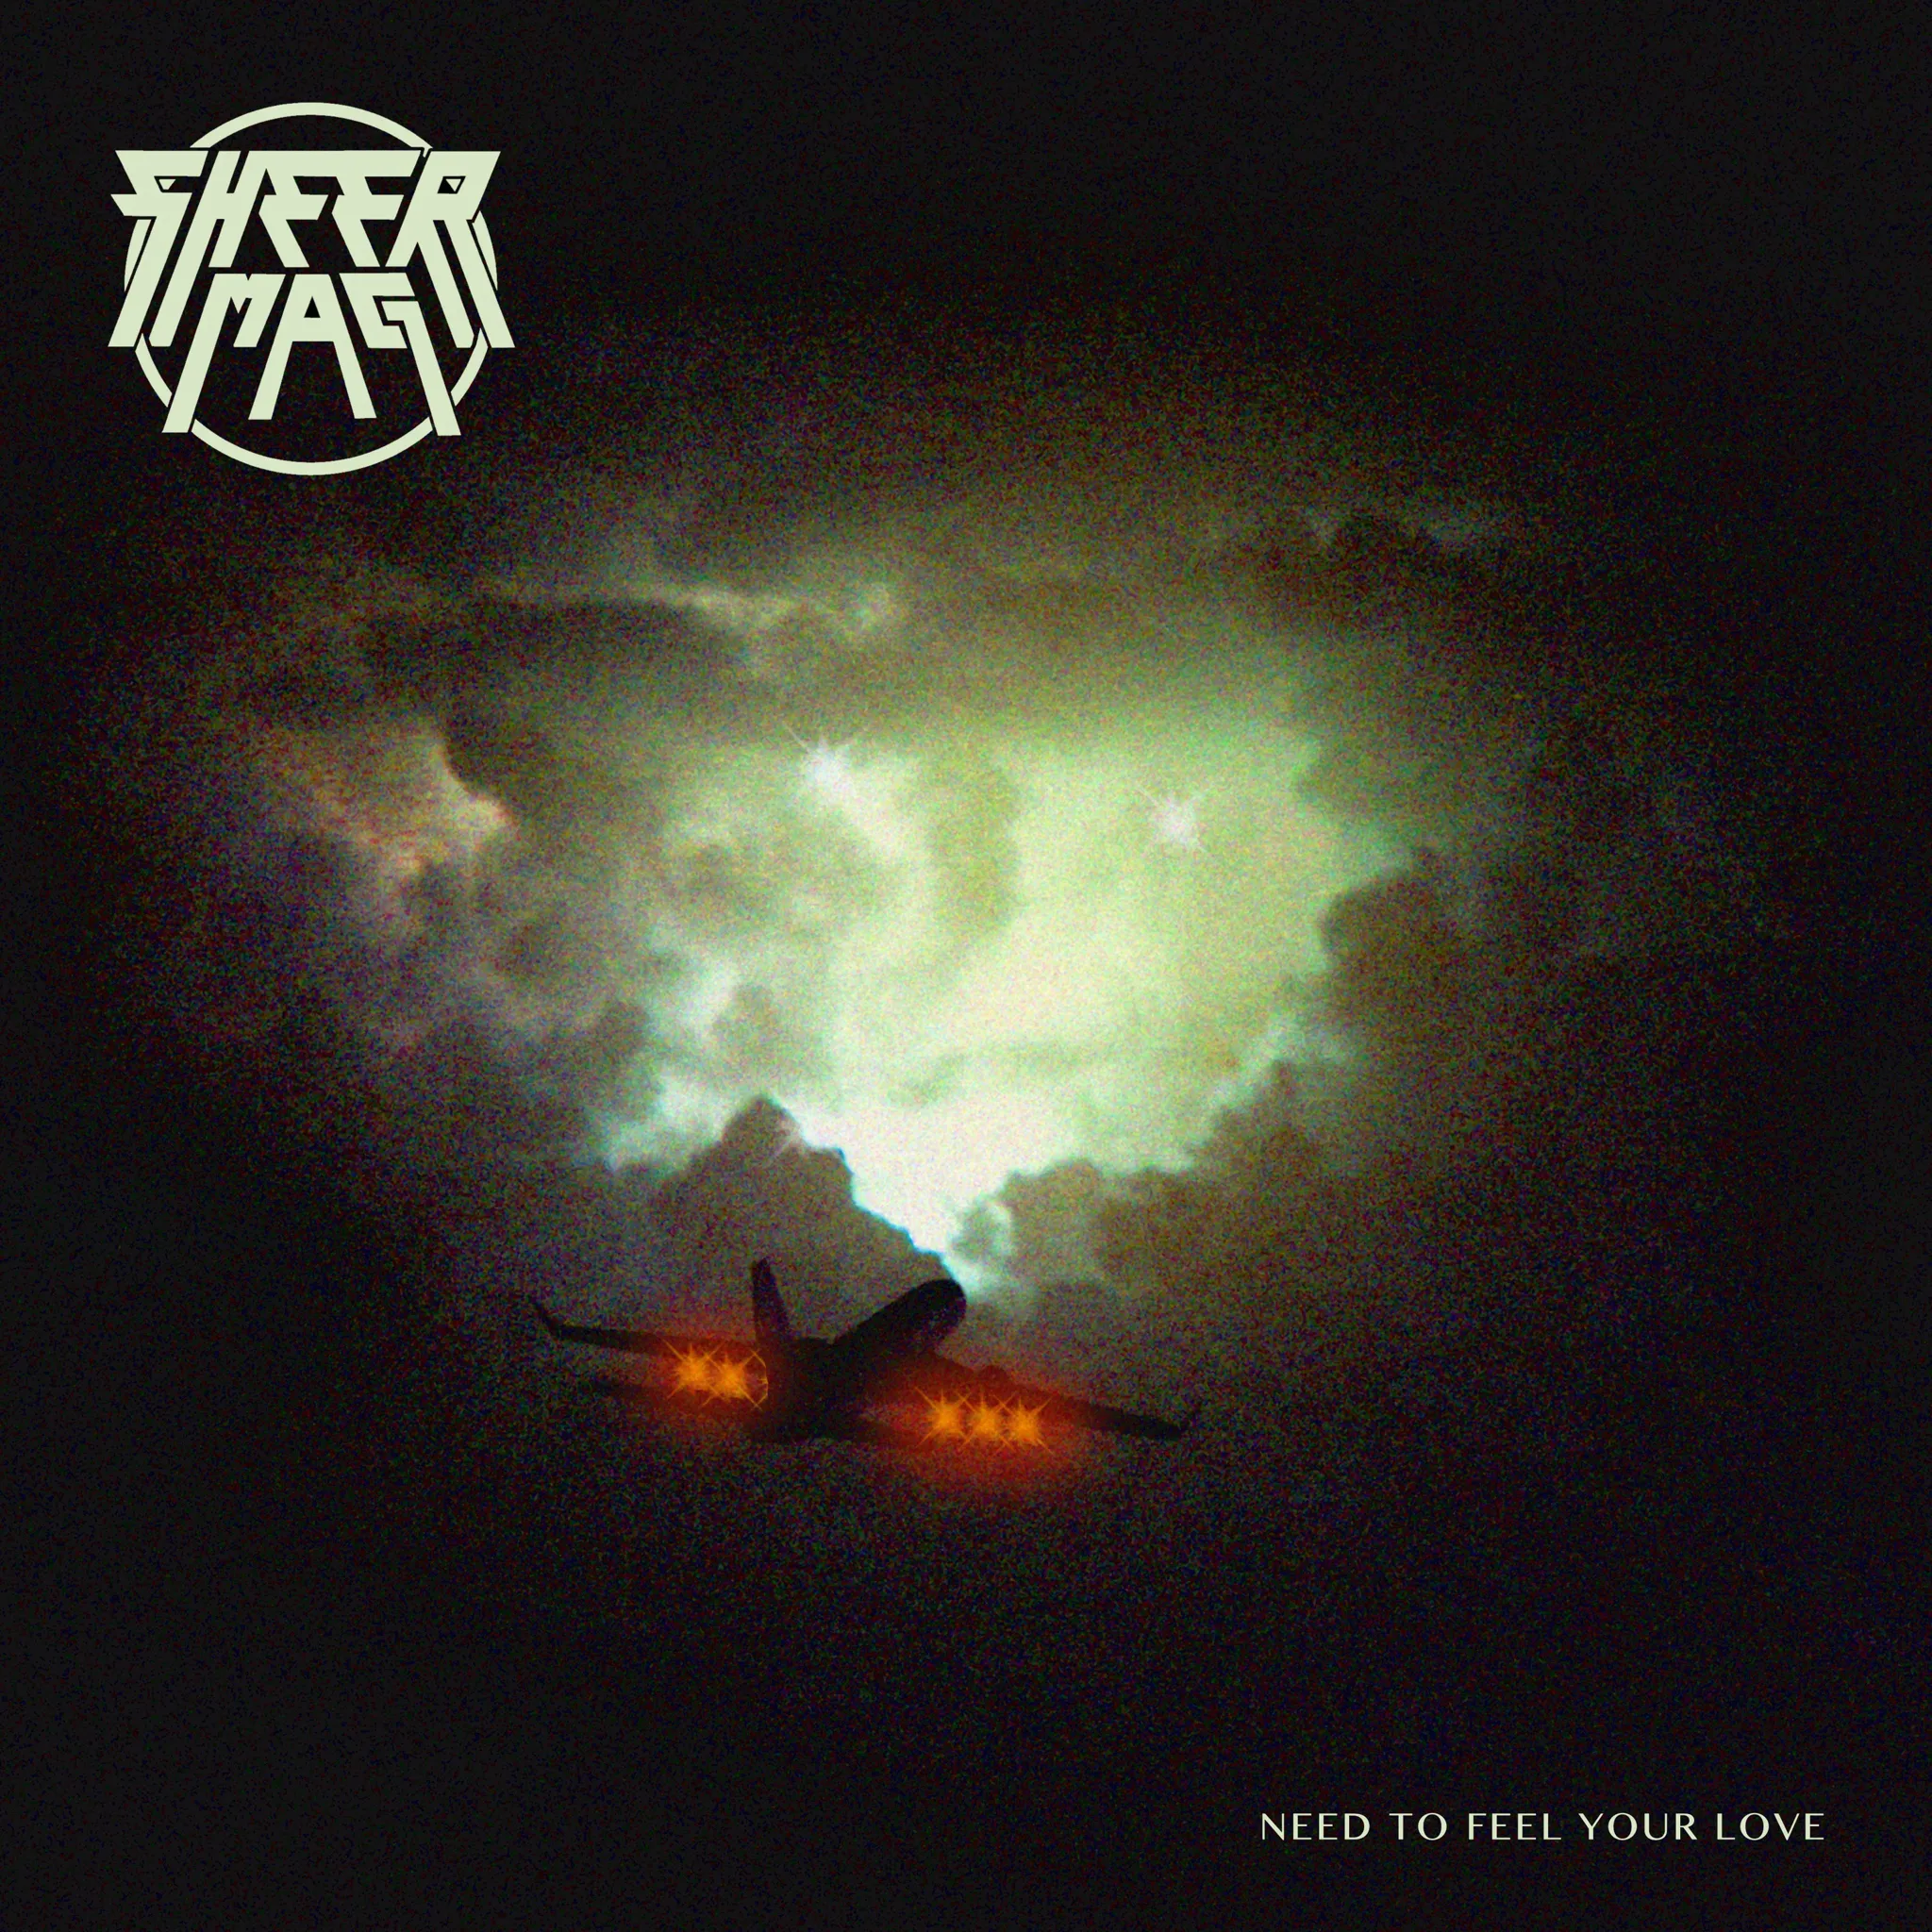 <strong>Sheer Mag - Need To Feel Your Love</strong> (Vinyl LP - black)